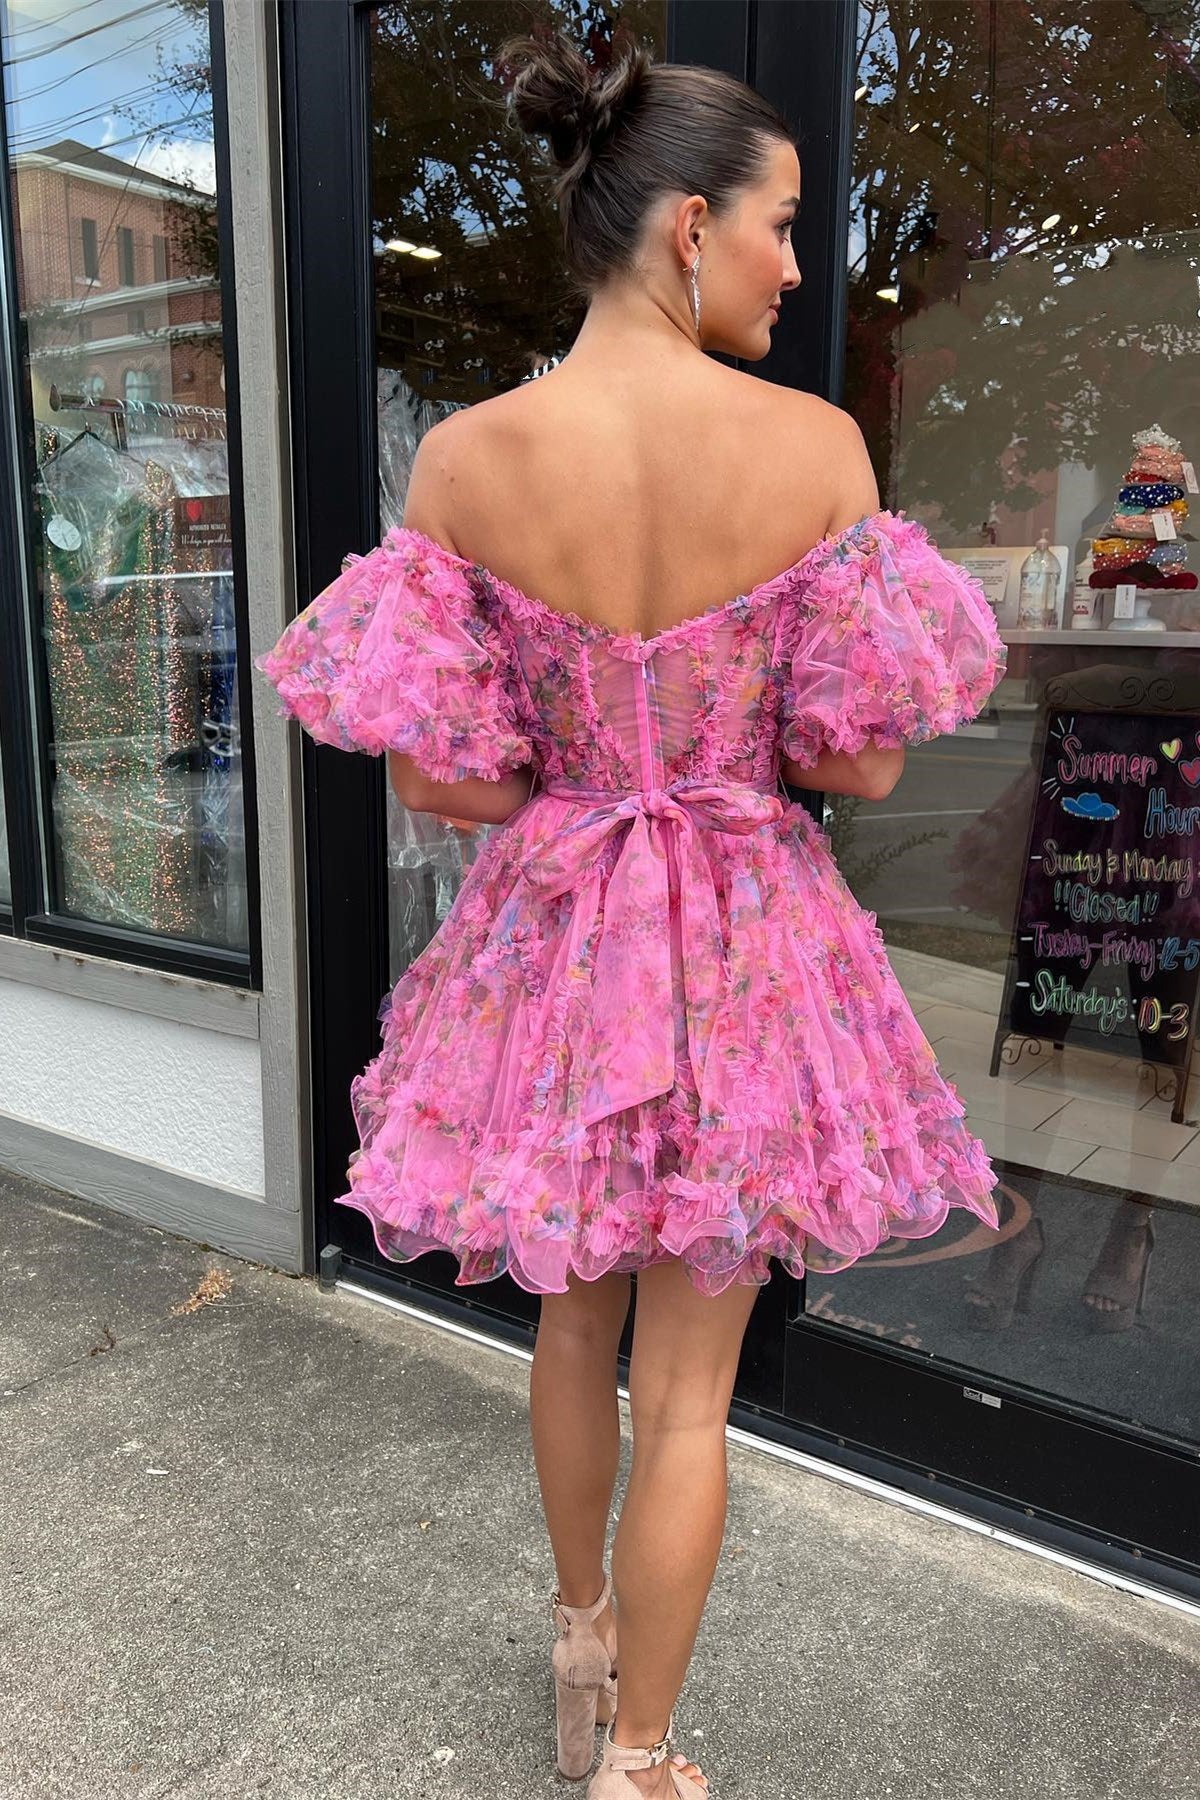 Blush Print Off-the-Shoulder A-Line Short Dress with Ruffles